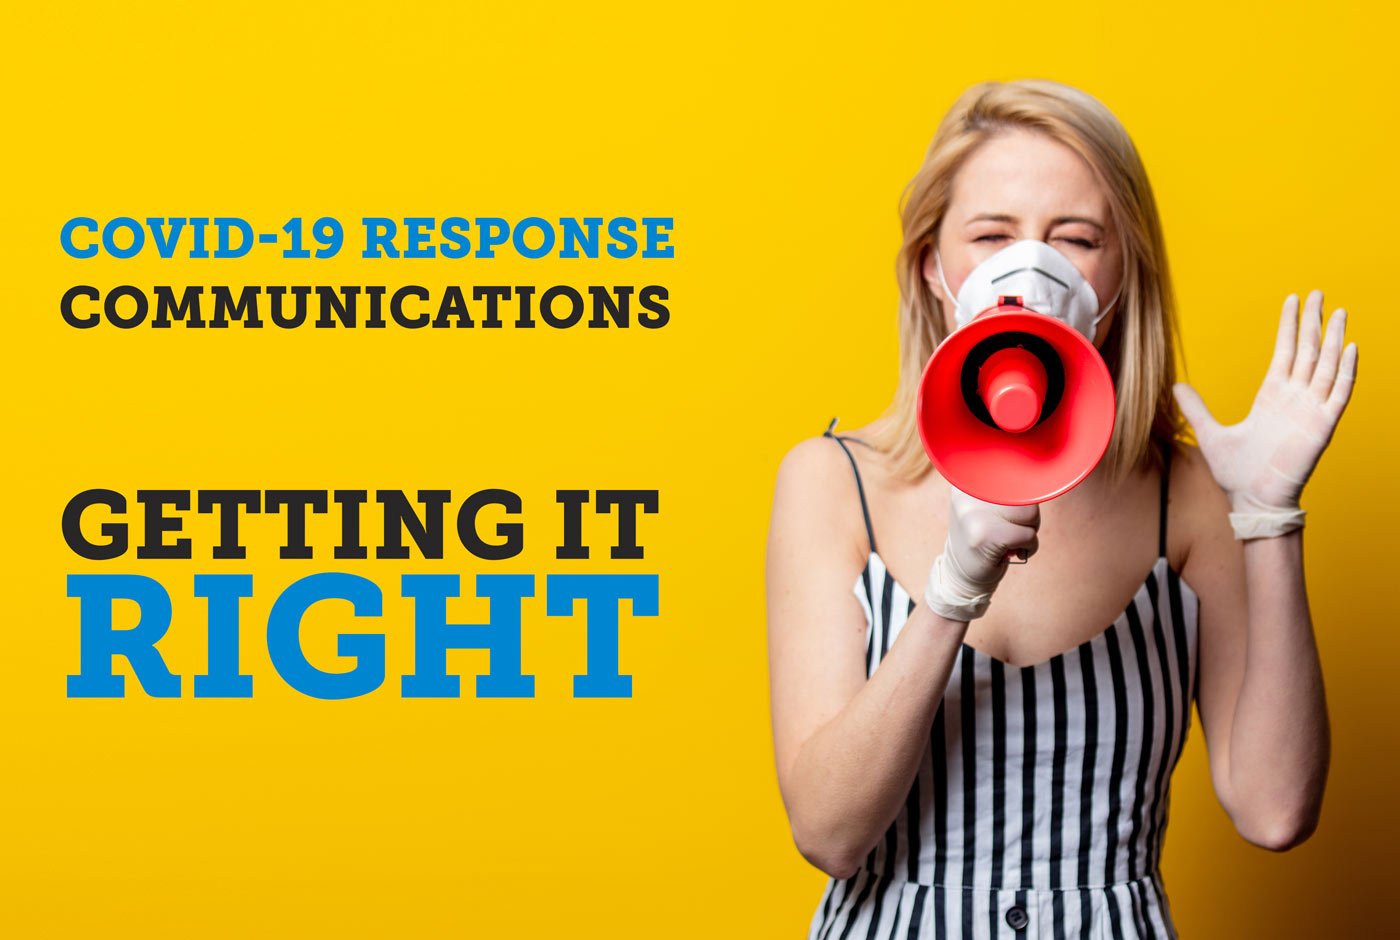 COVID-19 Response Communications – Getting it right